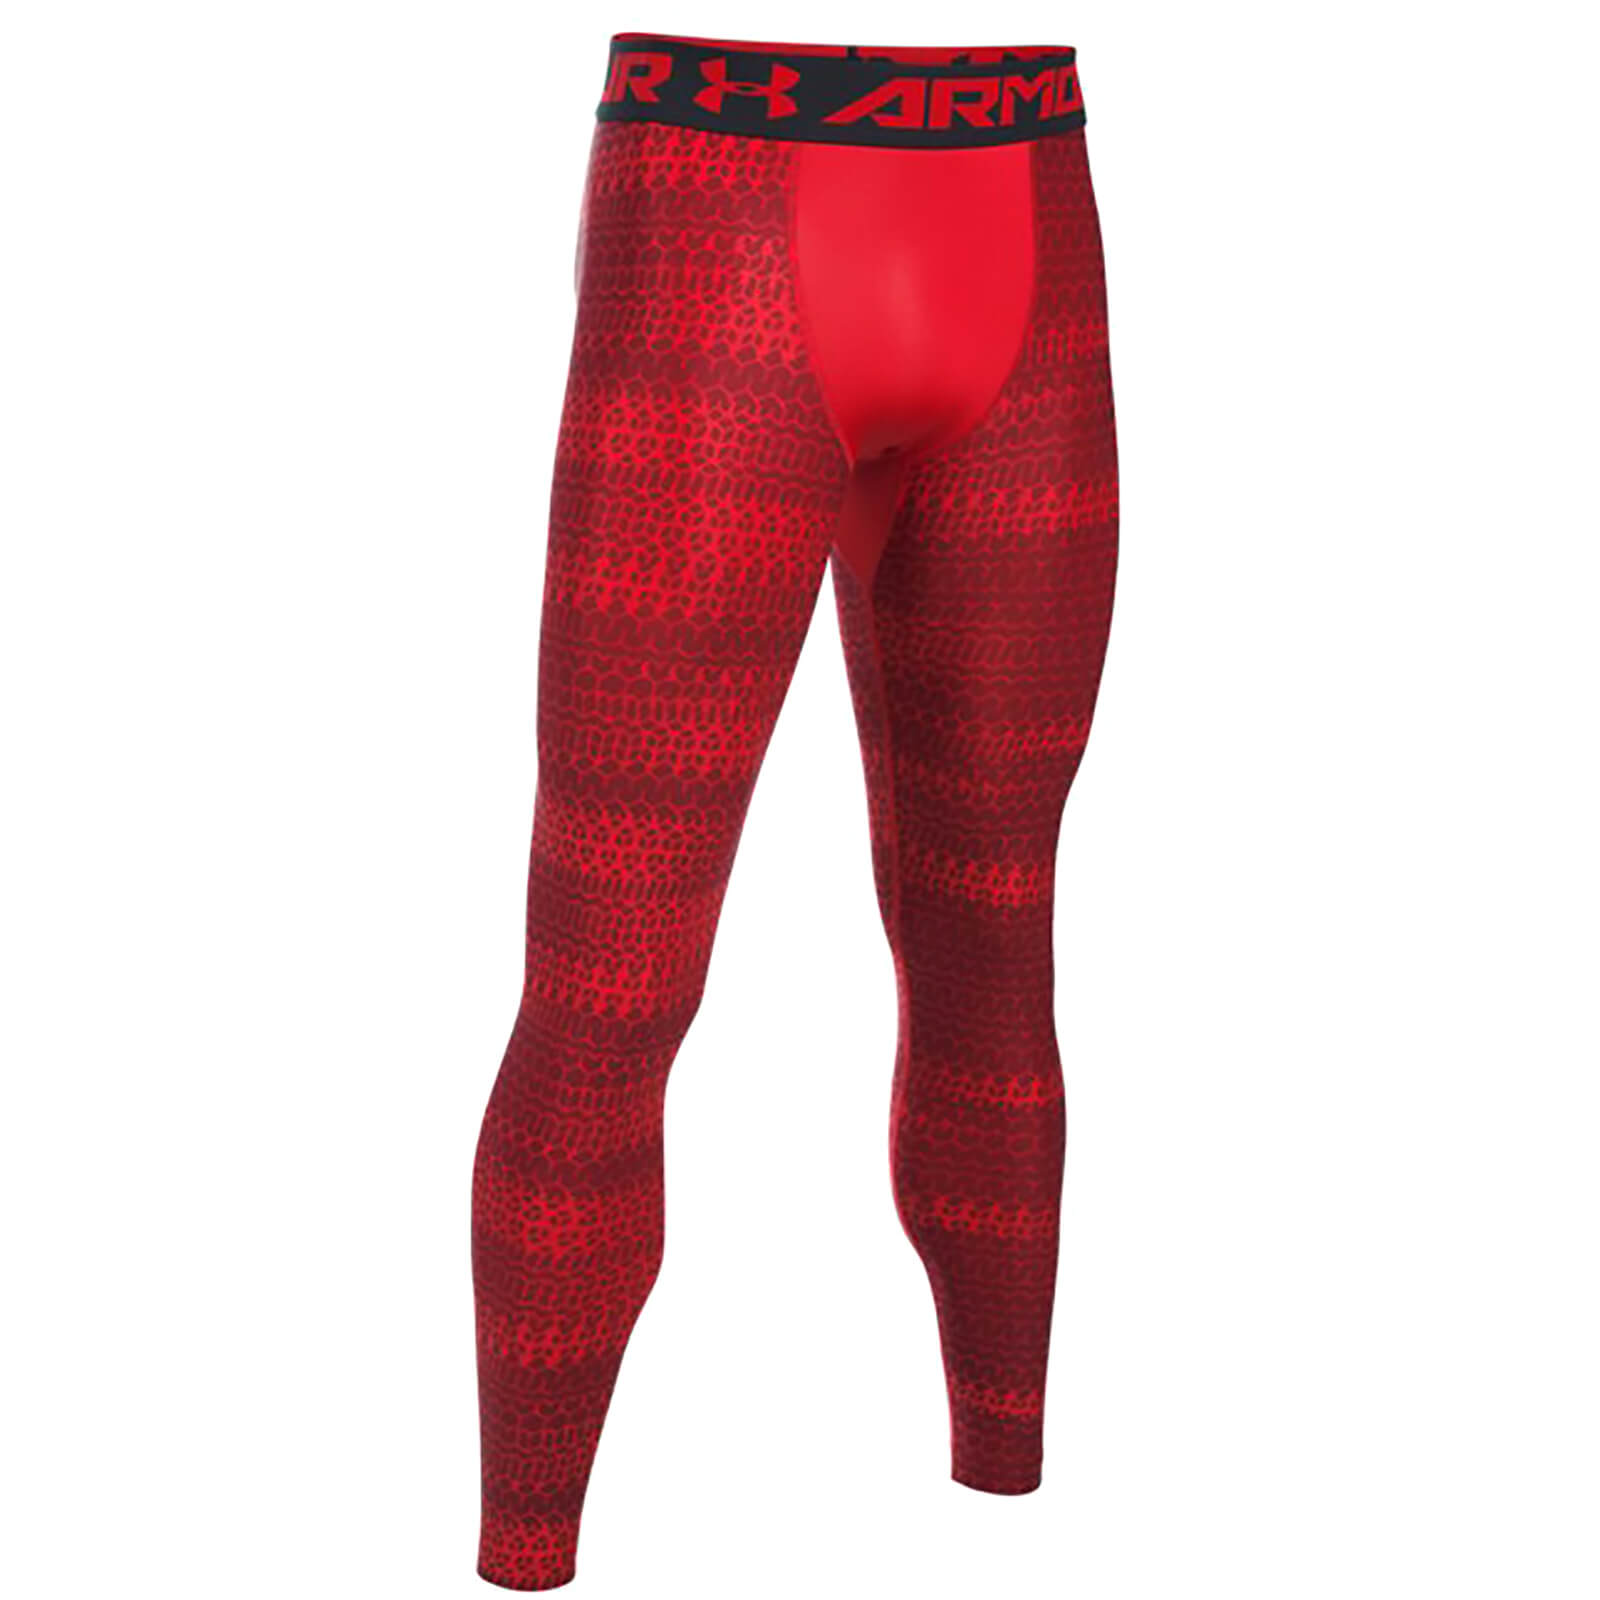 under armour red tights off 59% - www 